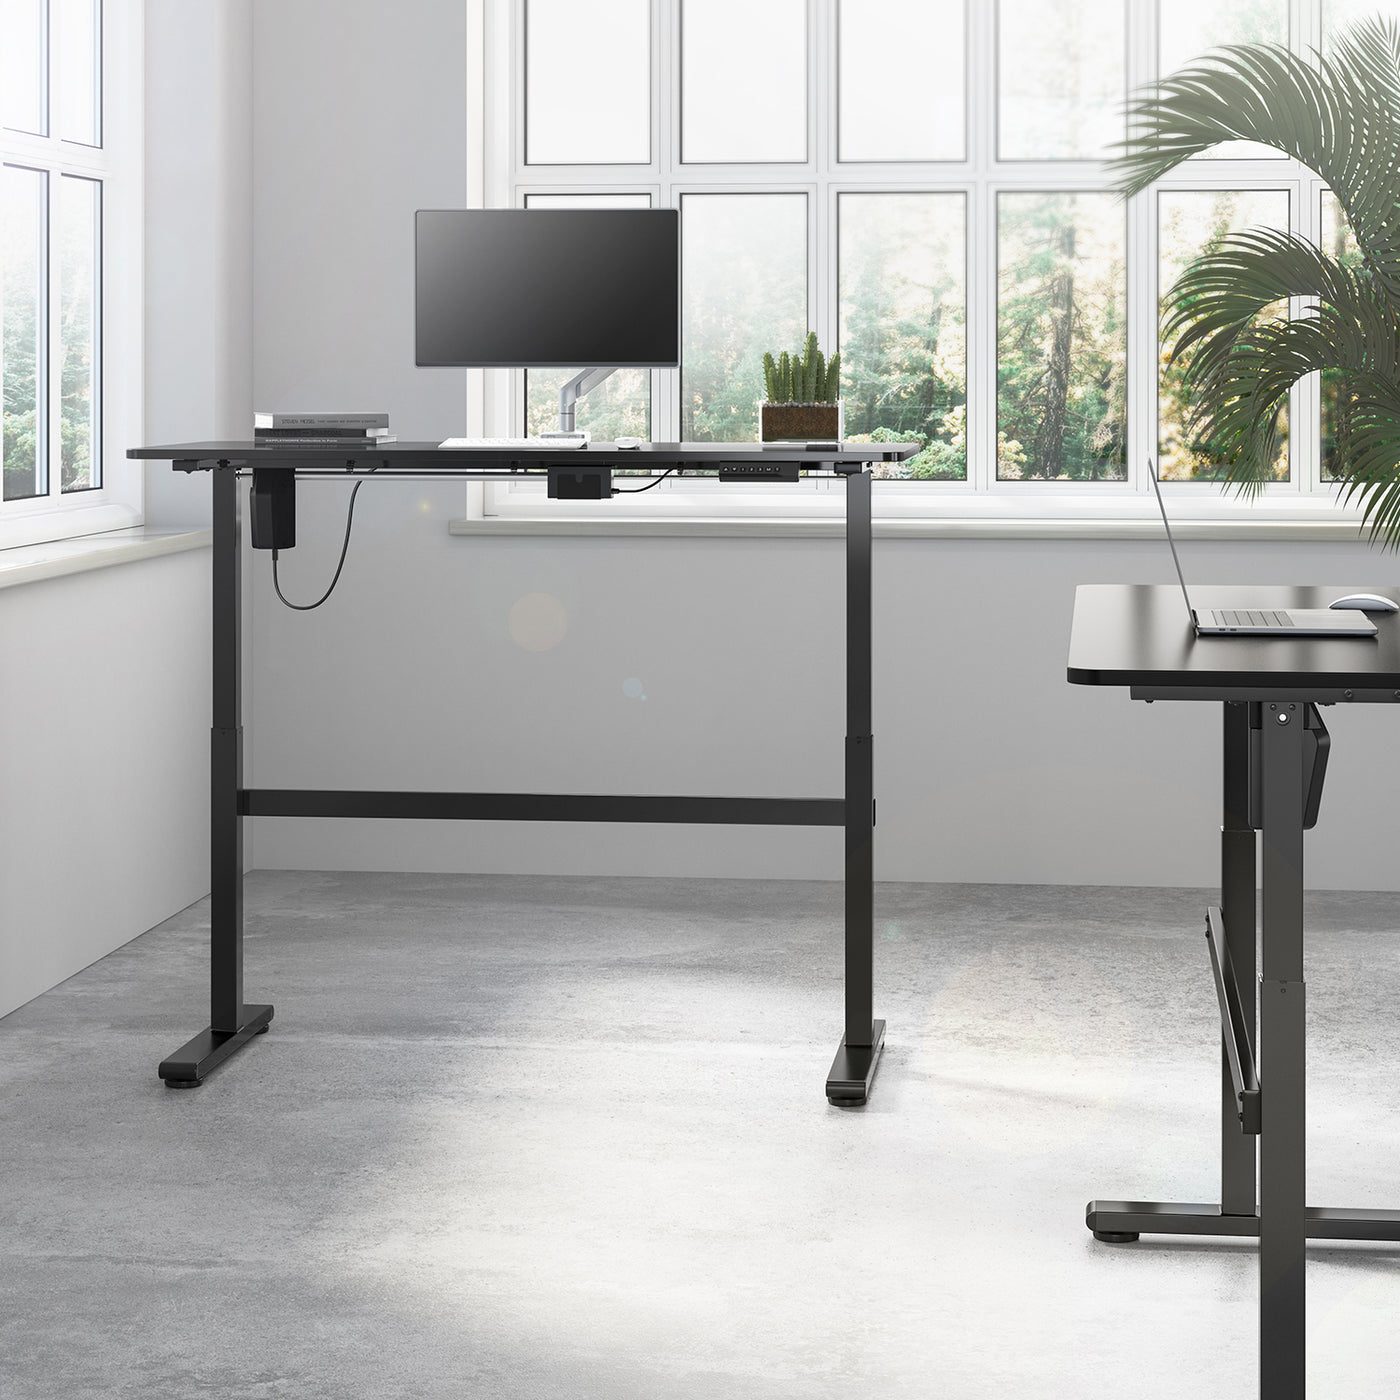 Ergo Office ER-434 Electric Height Adjustable Sit-Stand Desk with Desk Top Gray